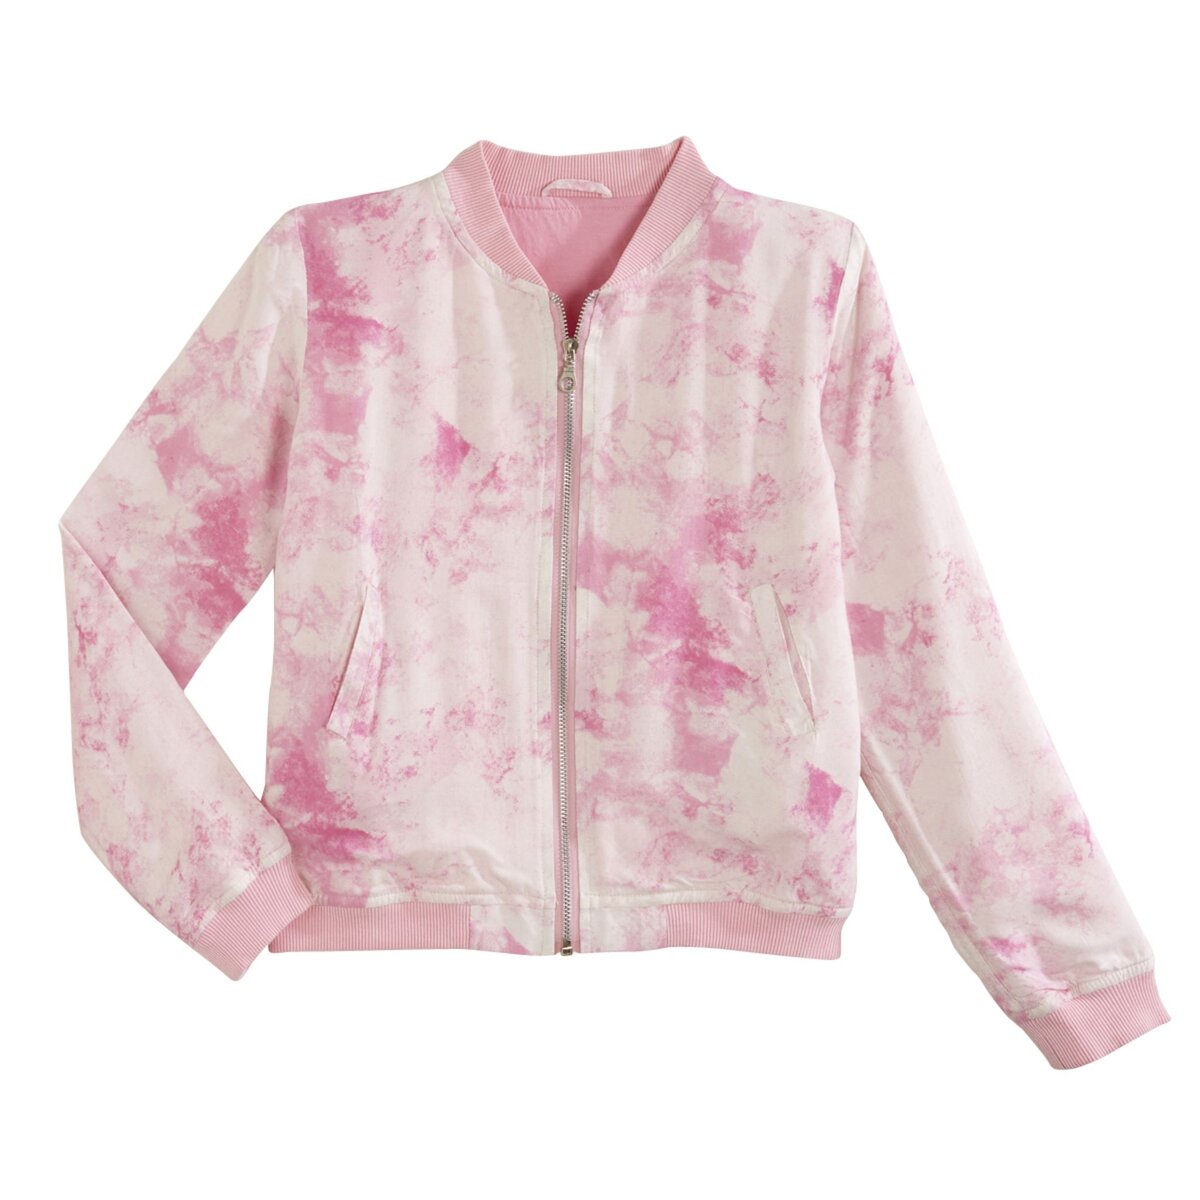 IN EXTENSO Bombers fille